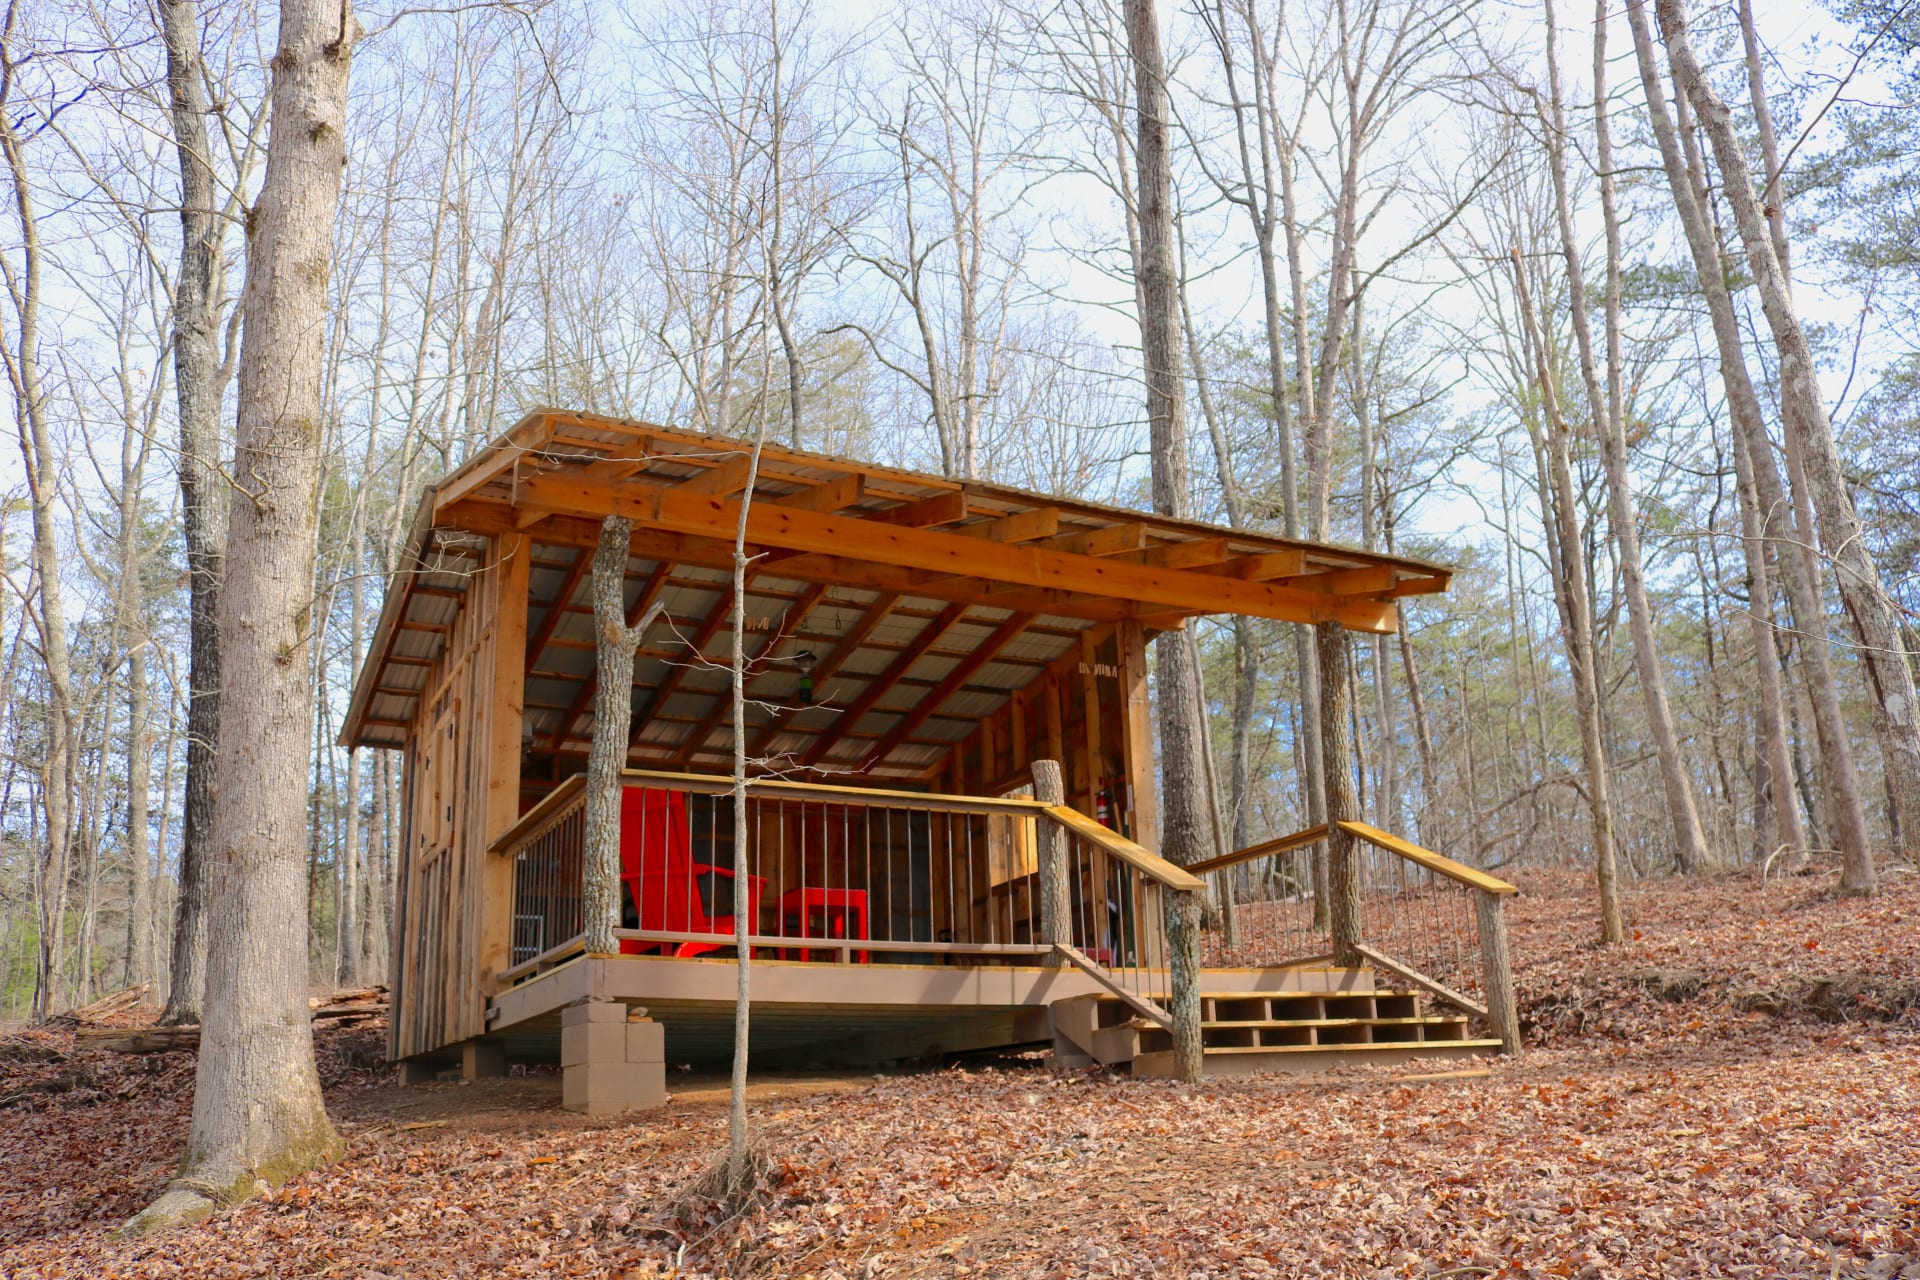 You are definitely in the mountains now! The shelter is hand crafted from all rough sawn locally sourced wood from the site or from Fannin County forests.